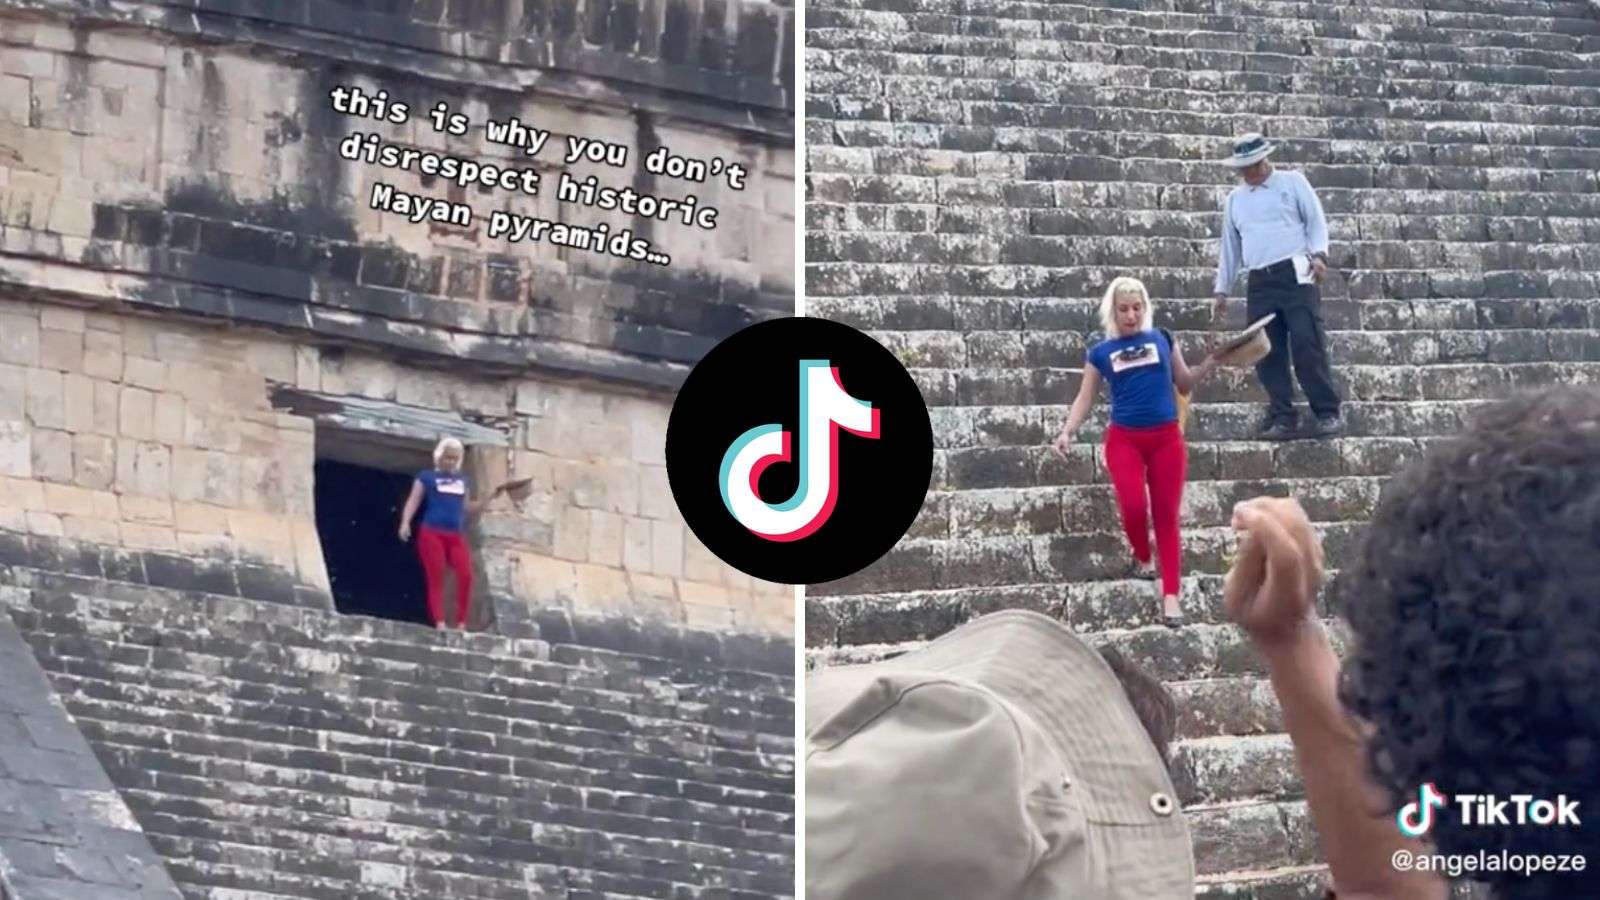 Viral TikTok shows tourist getting booed for climbing ancient Mayan pyramid in Mexico